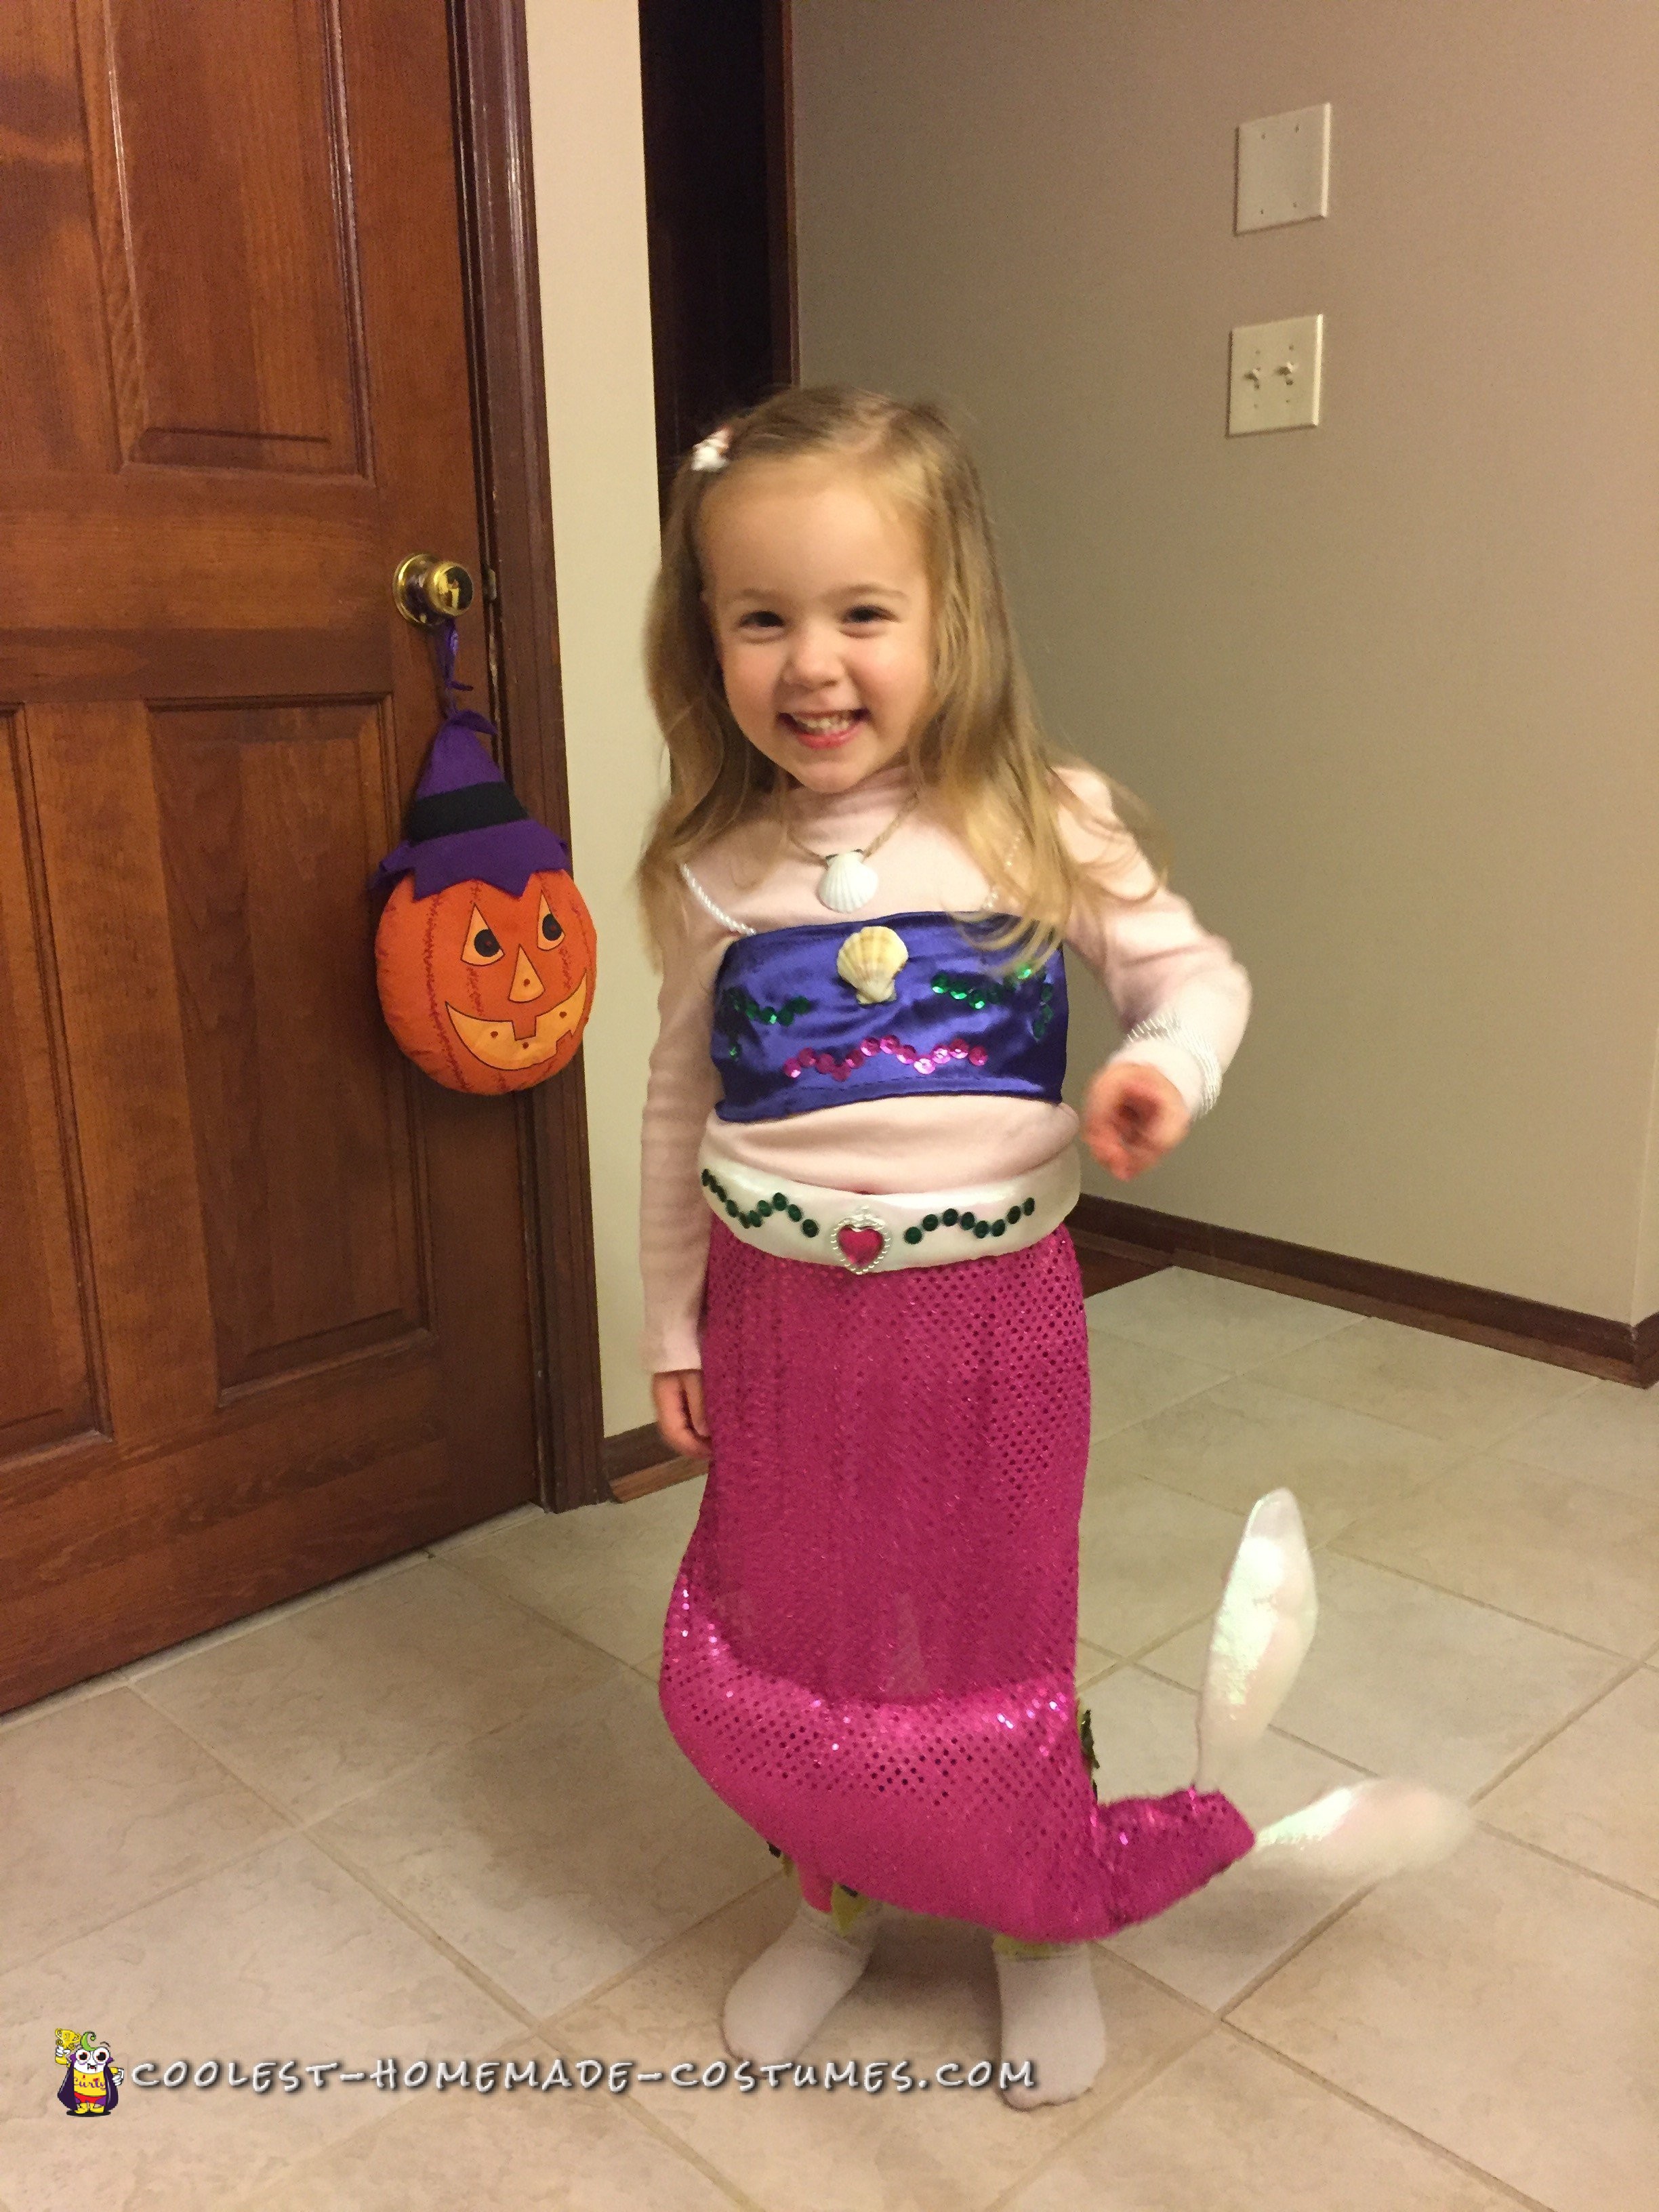 Our Little Mermaid in Costume